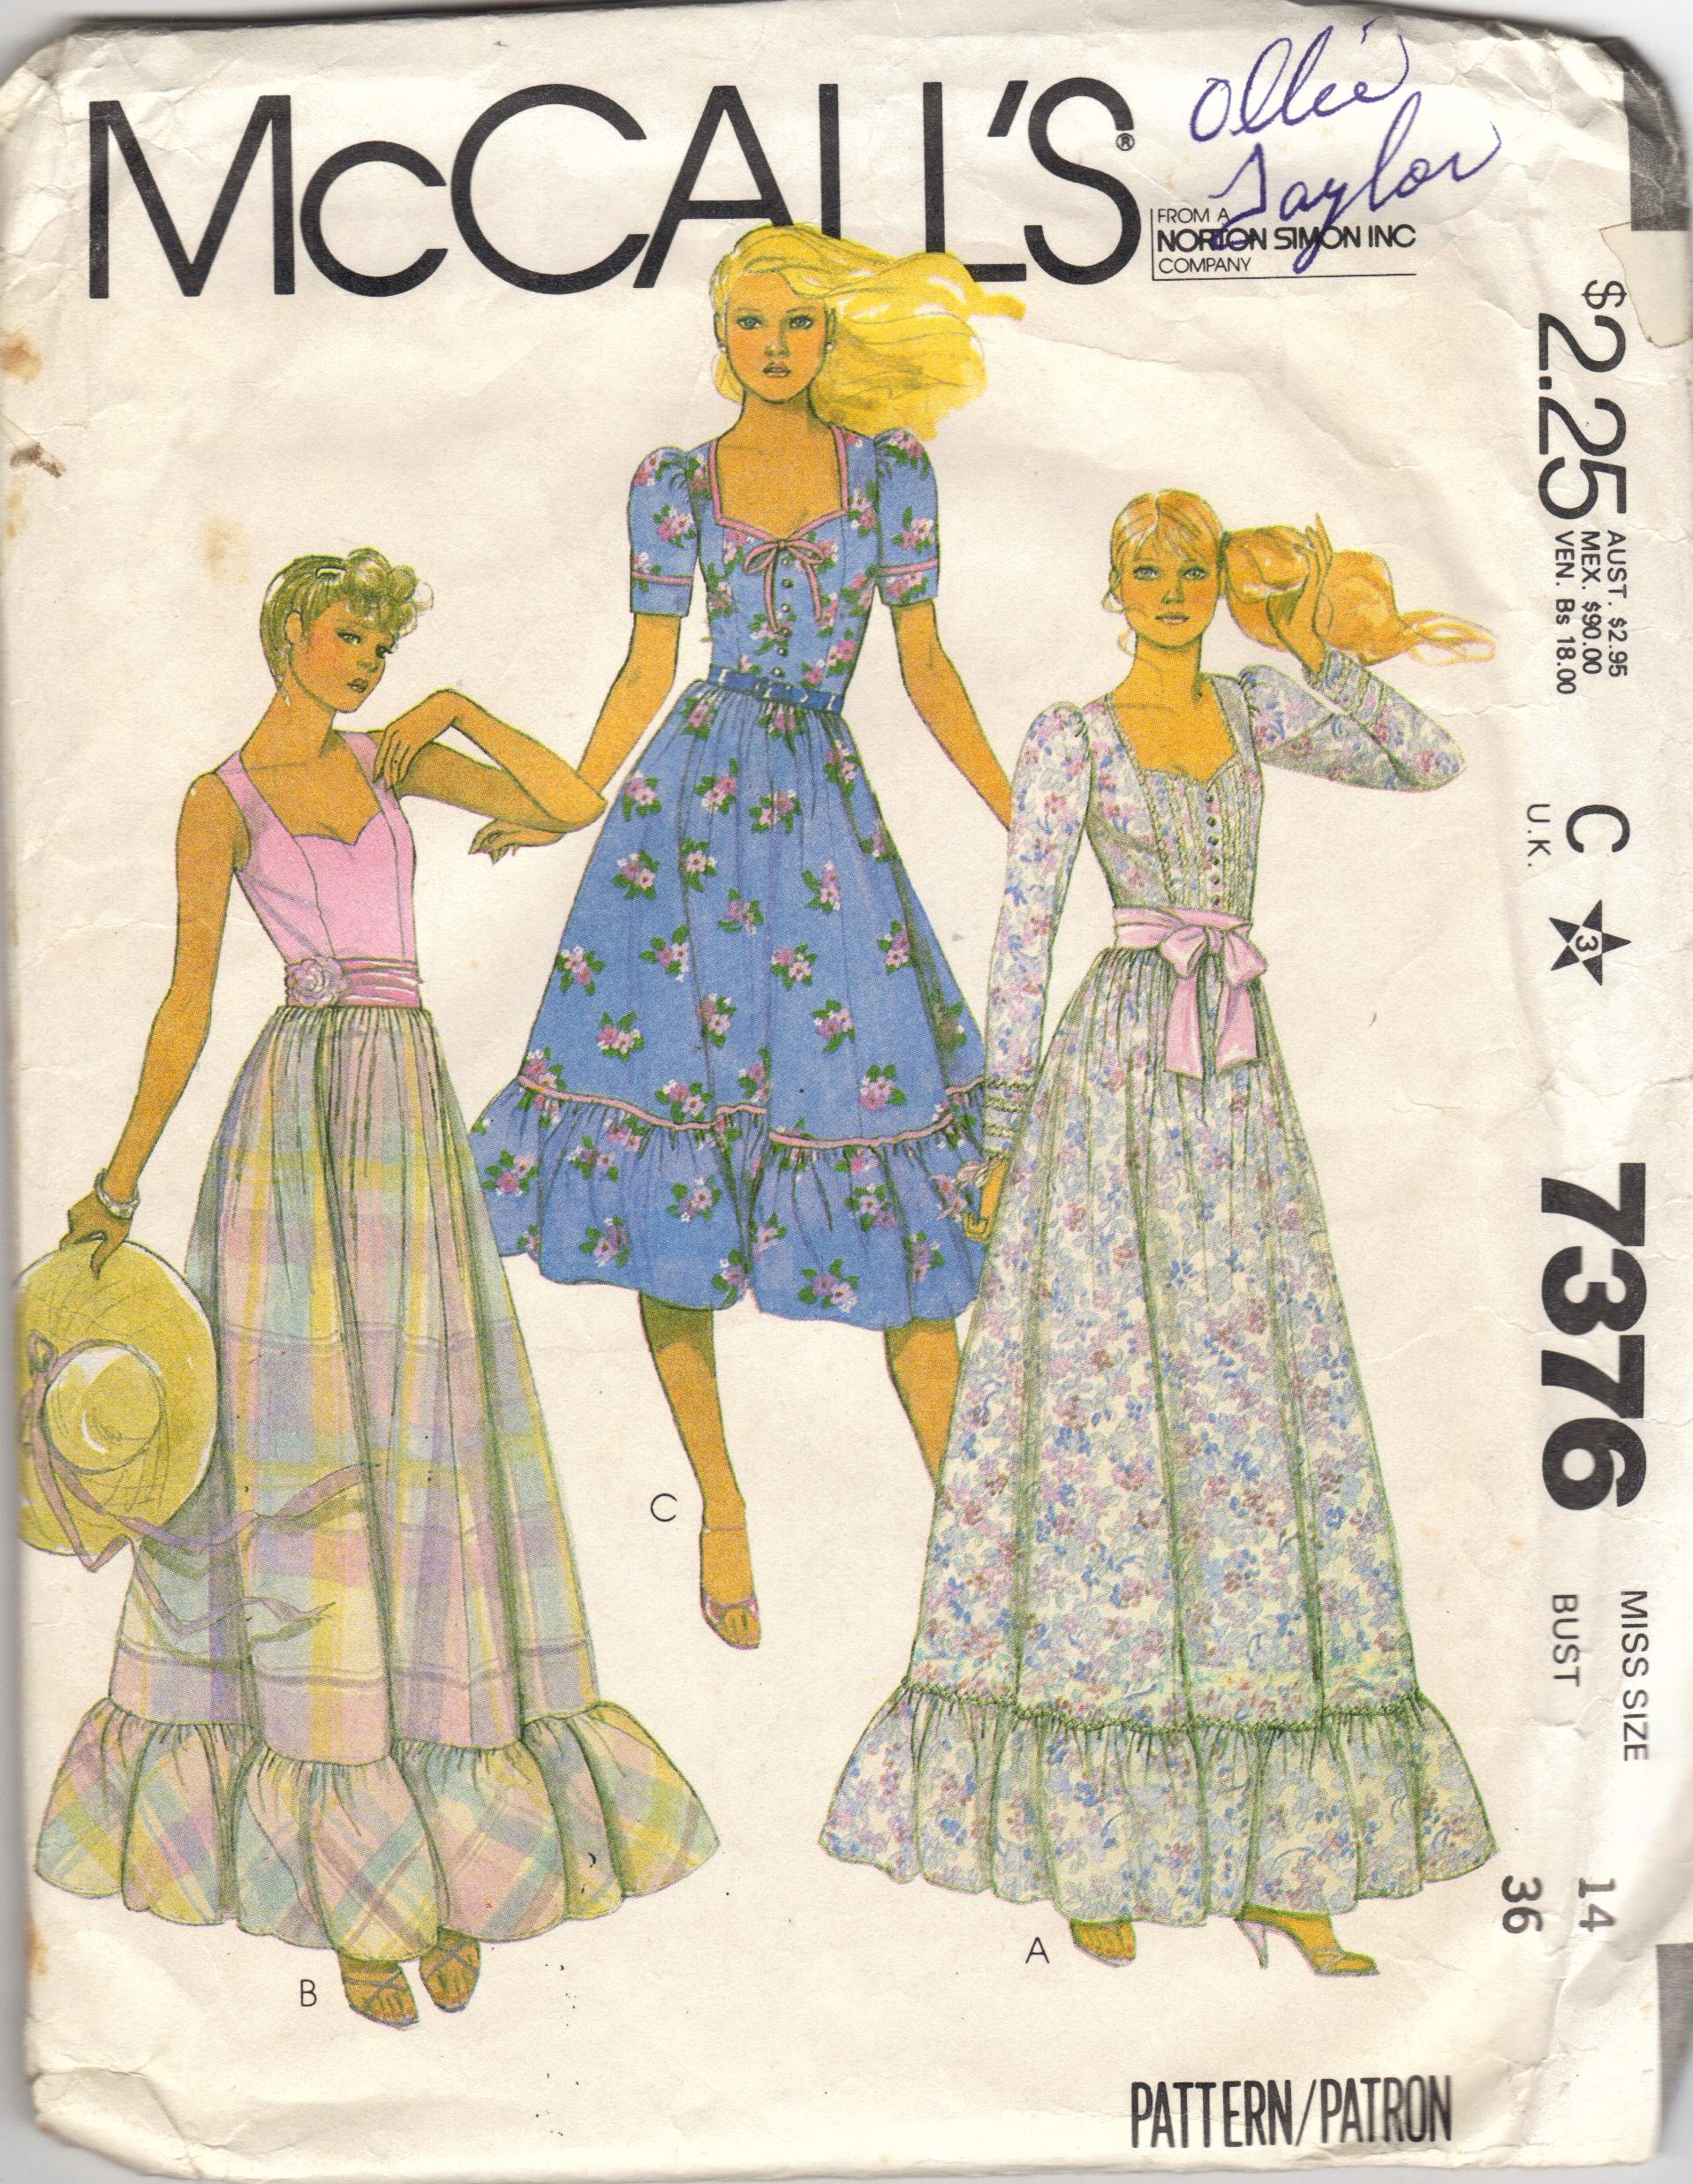 SEWING PATTERN REVIEW: McCalls 8312 gathered dress